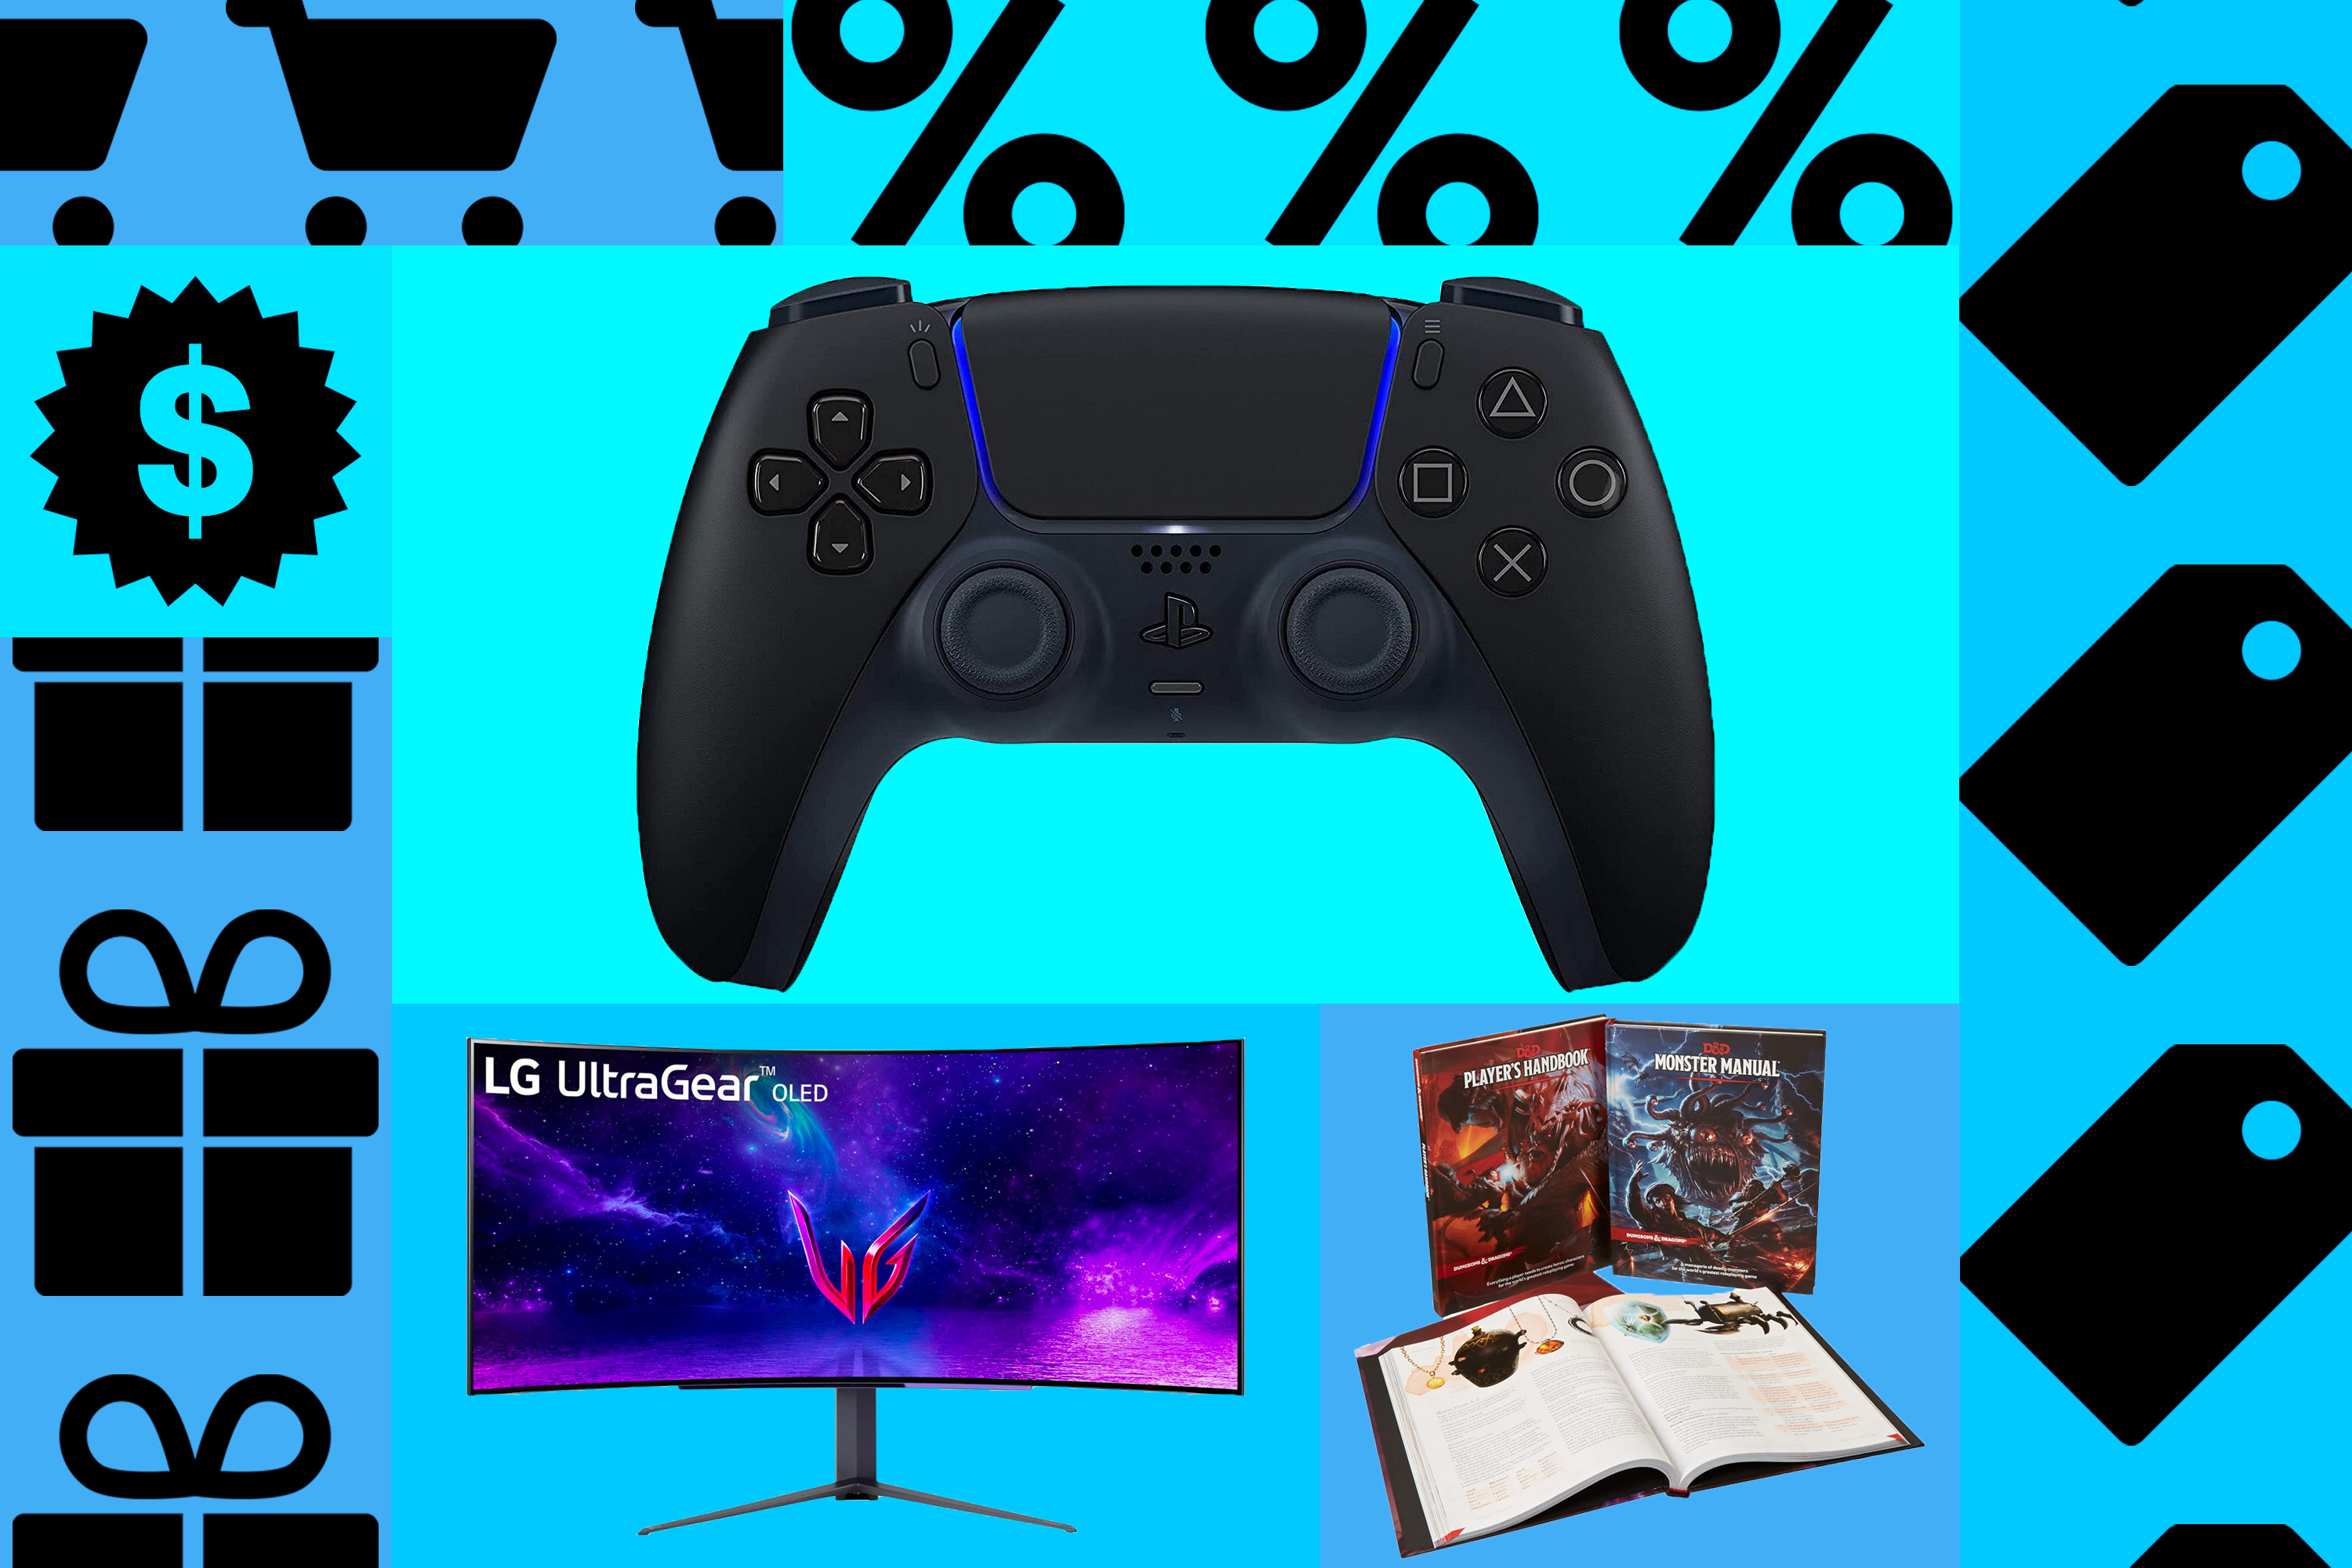 An image composition consisting of a black Sony DualSense controller, a Dungeons &amp; Dragons starter kit, and a 45-inch LG UltraGear curved OLED monitor. All products are surrounded by holiday and sale-related iconography, like a gift box, a gift tag, and a percentage sign.